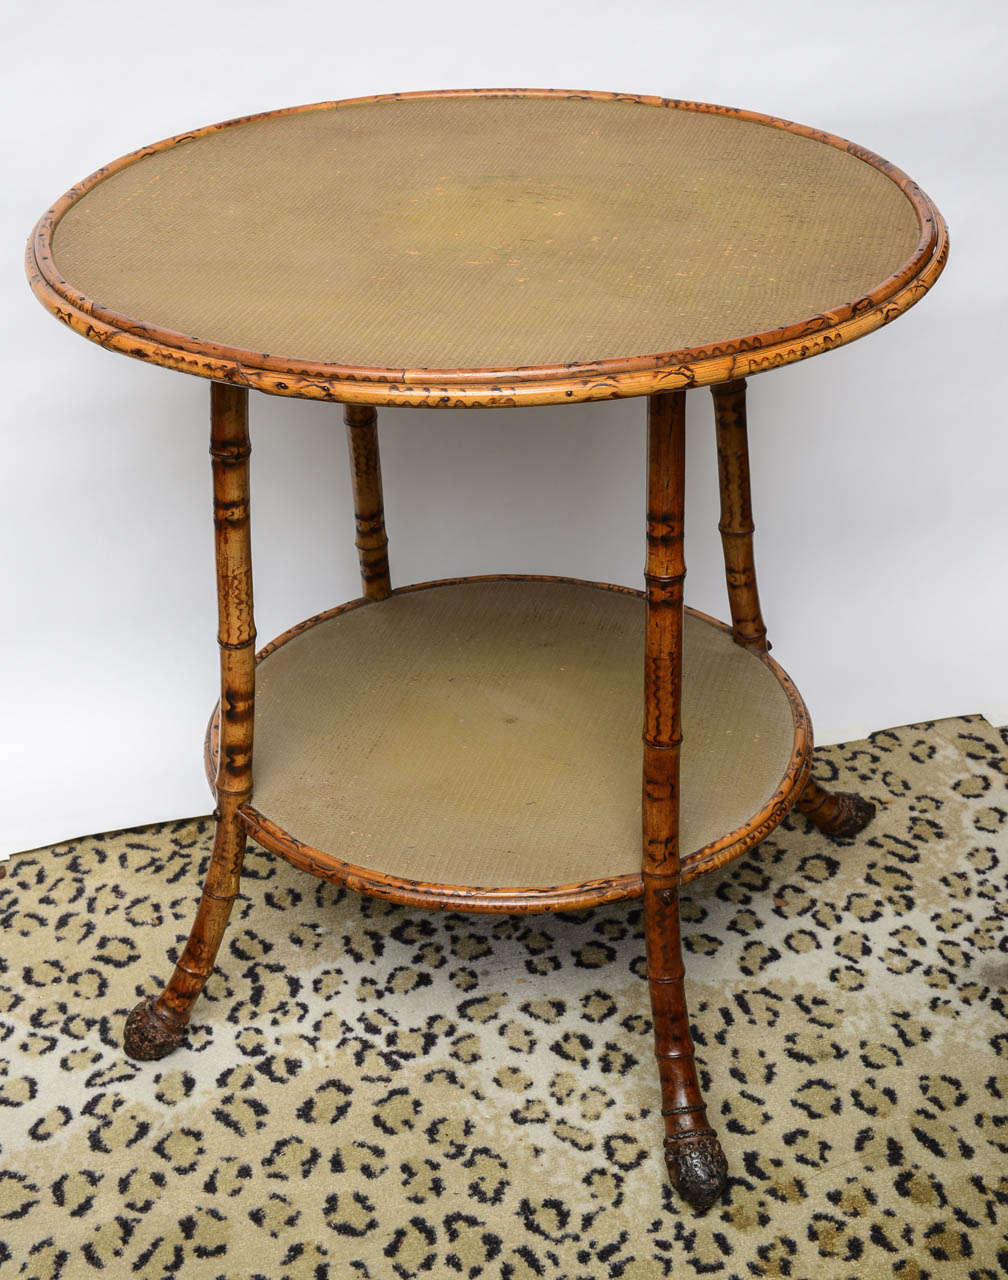 Its a very original side round bamboo table with roots..